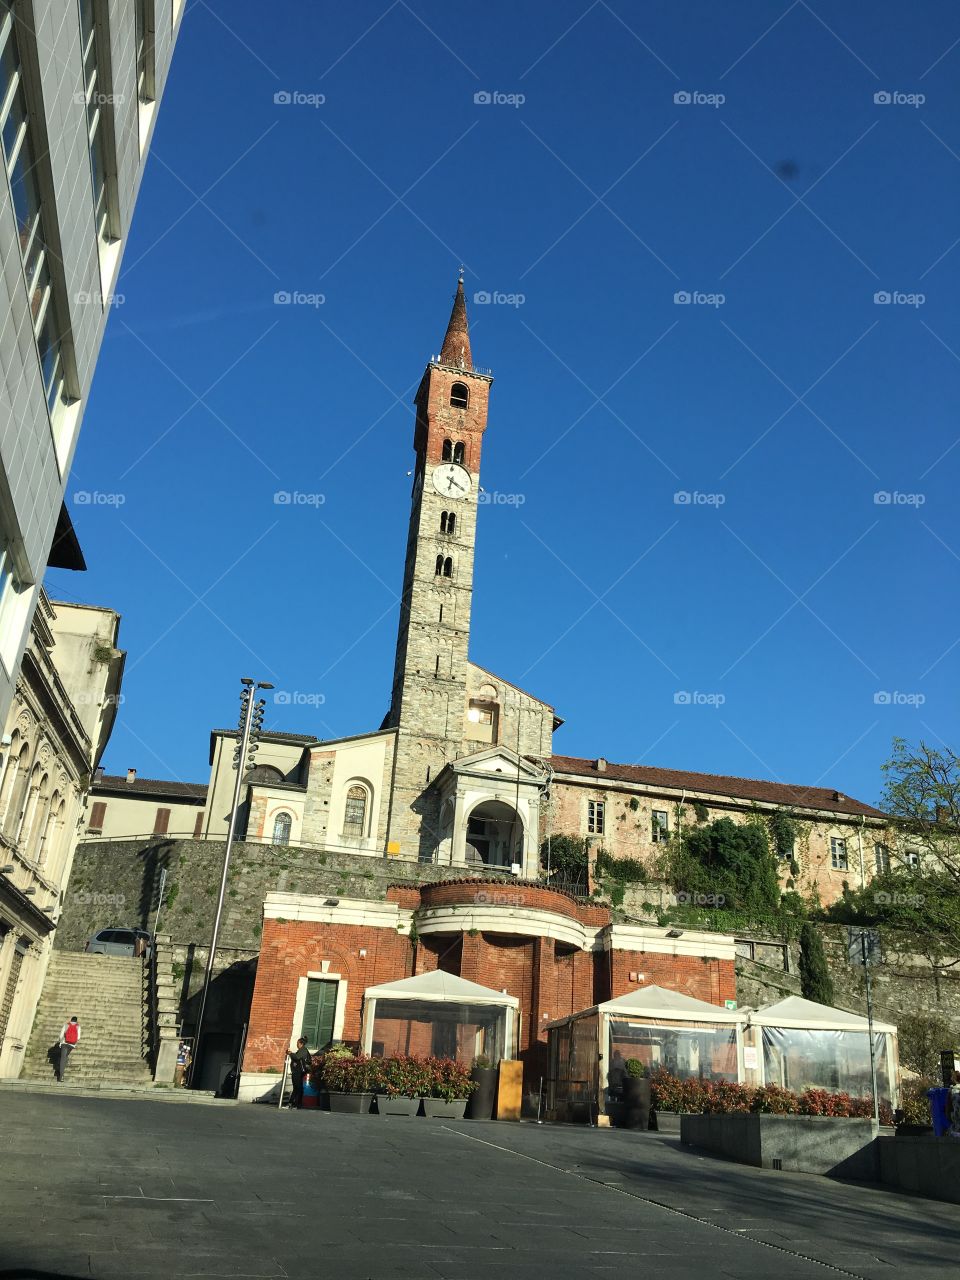 Church Tower in Italy